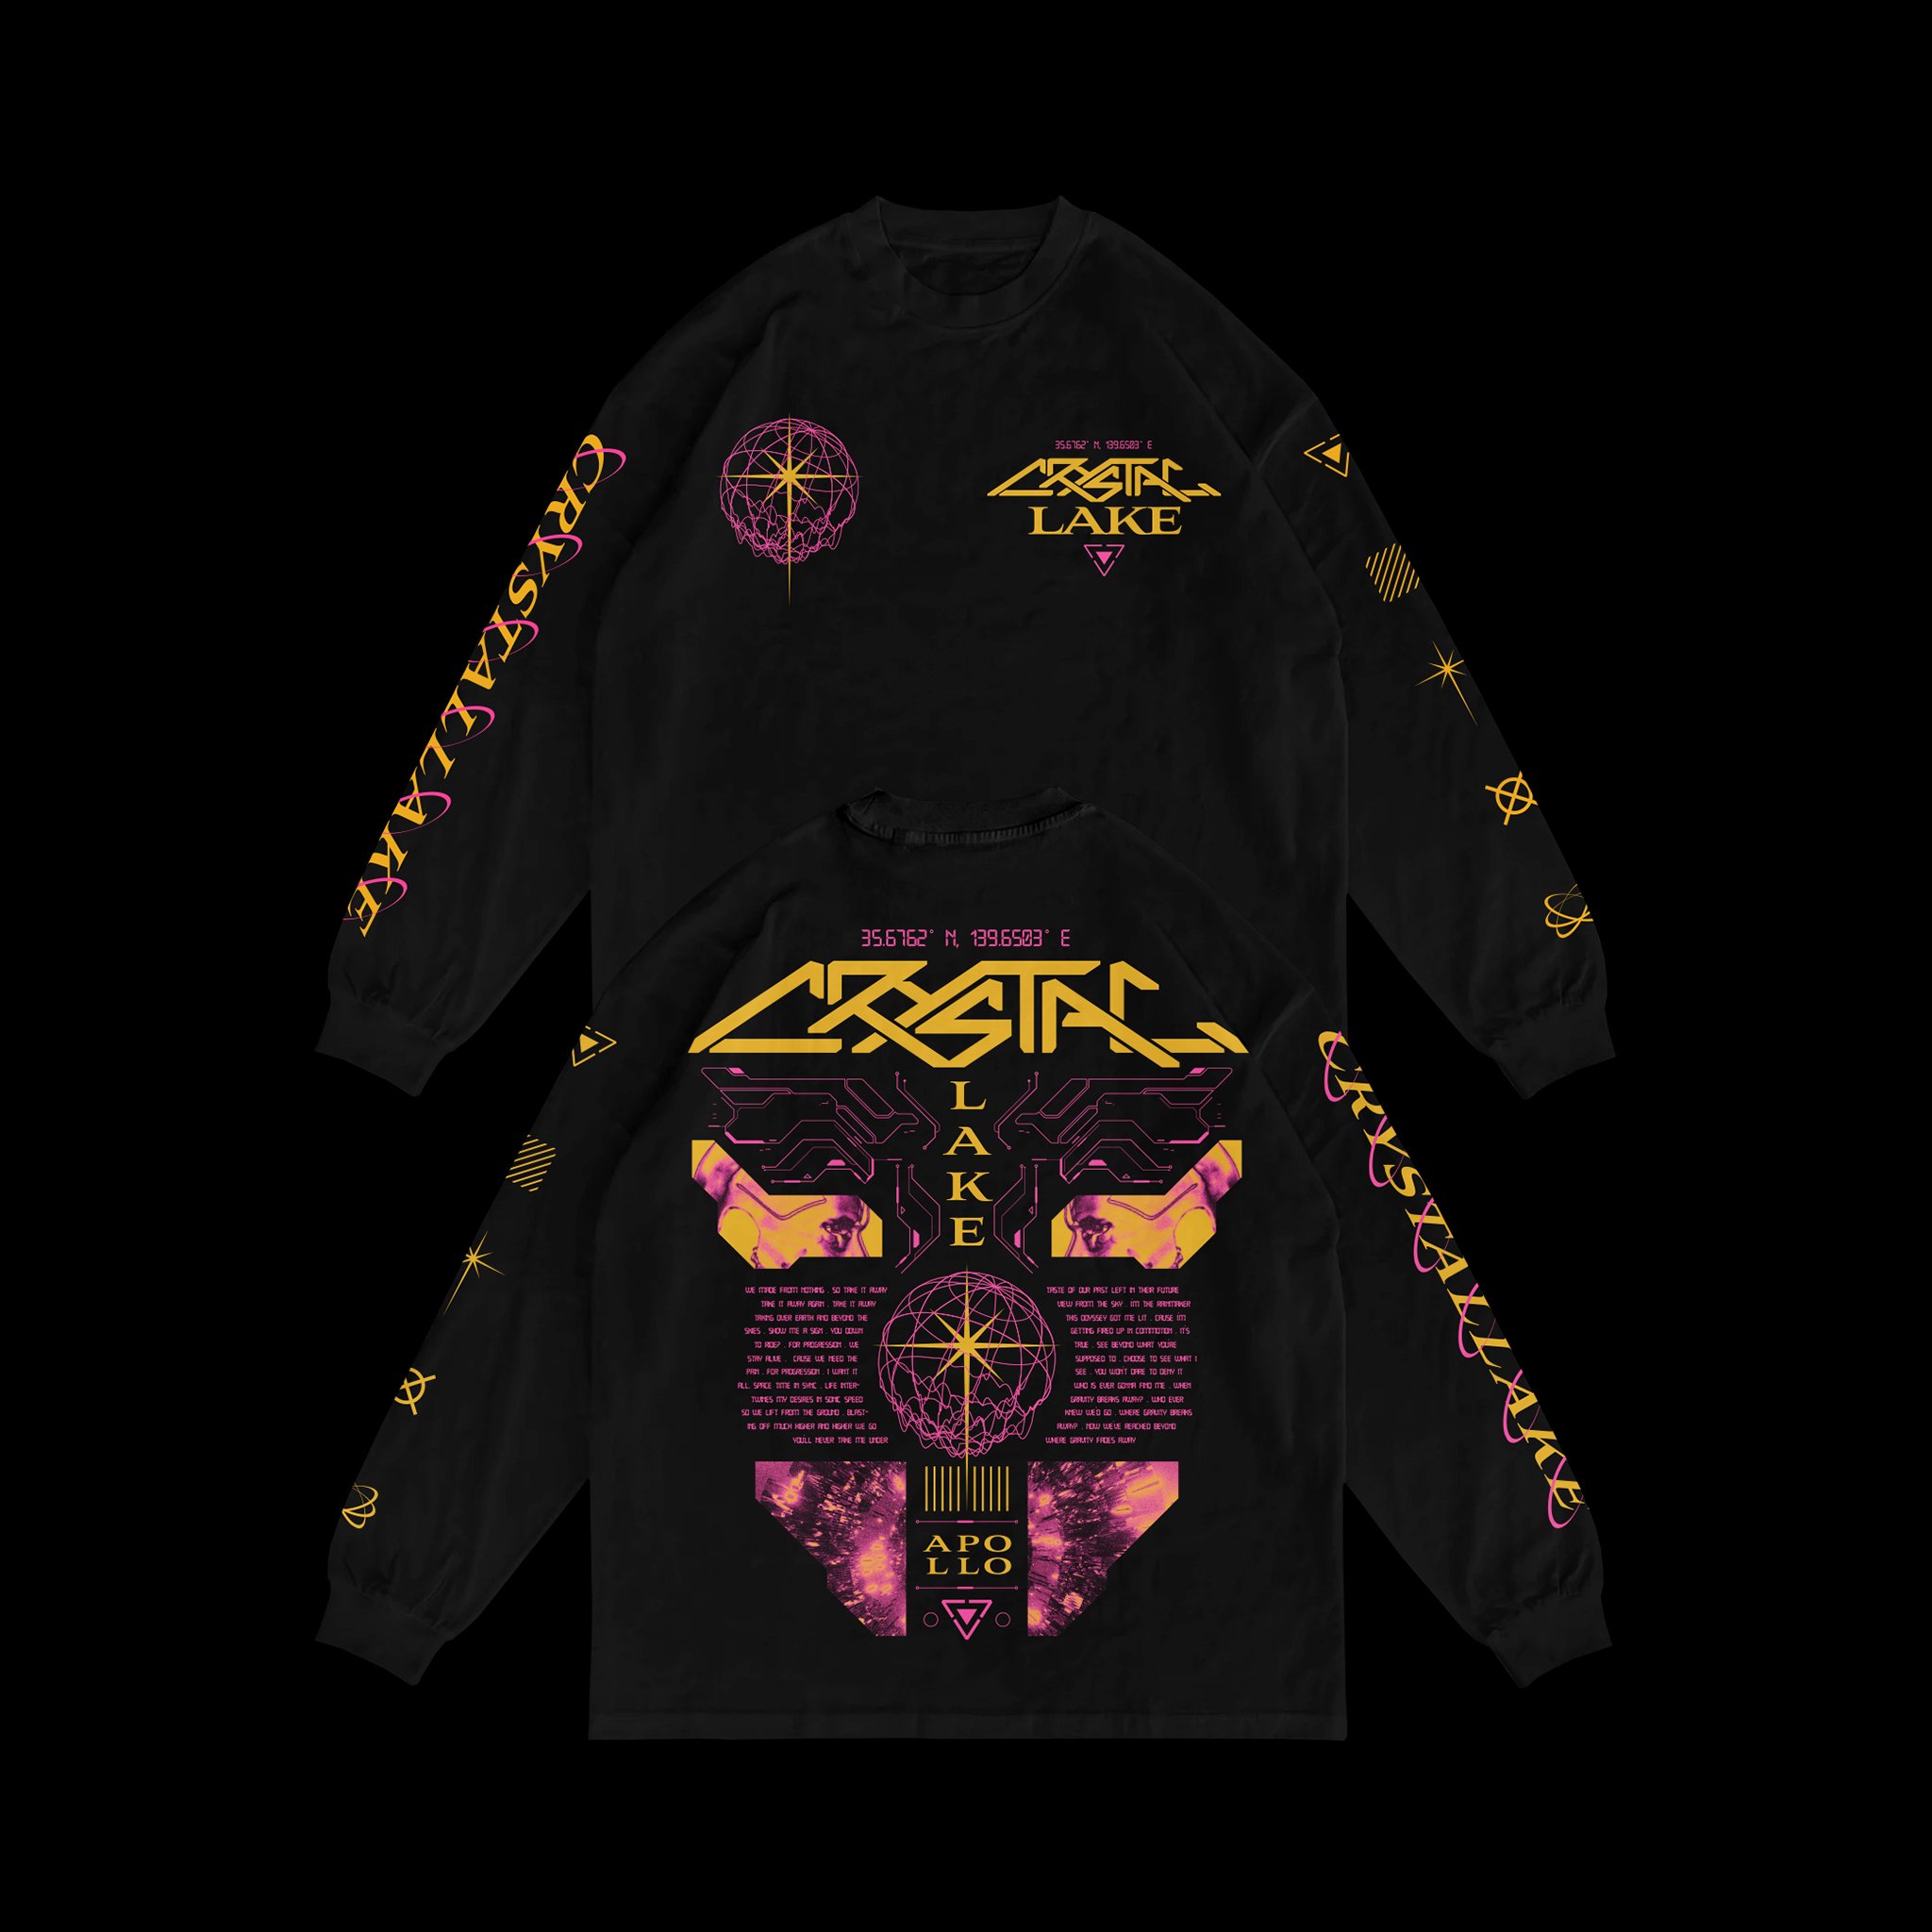 Check out this #flashbackfriday longsleeve I designed for @crystallake777 in late 2020. It was my first venture into a cyberpunk-style layout, and though I've learned a lot since then, this one still holds a special place for me. As if the layout was